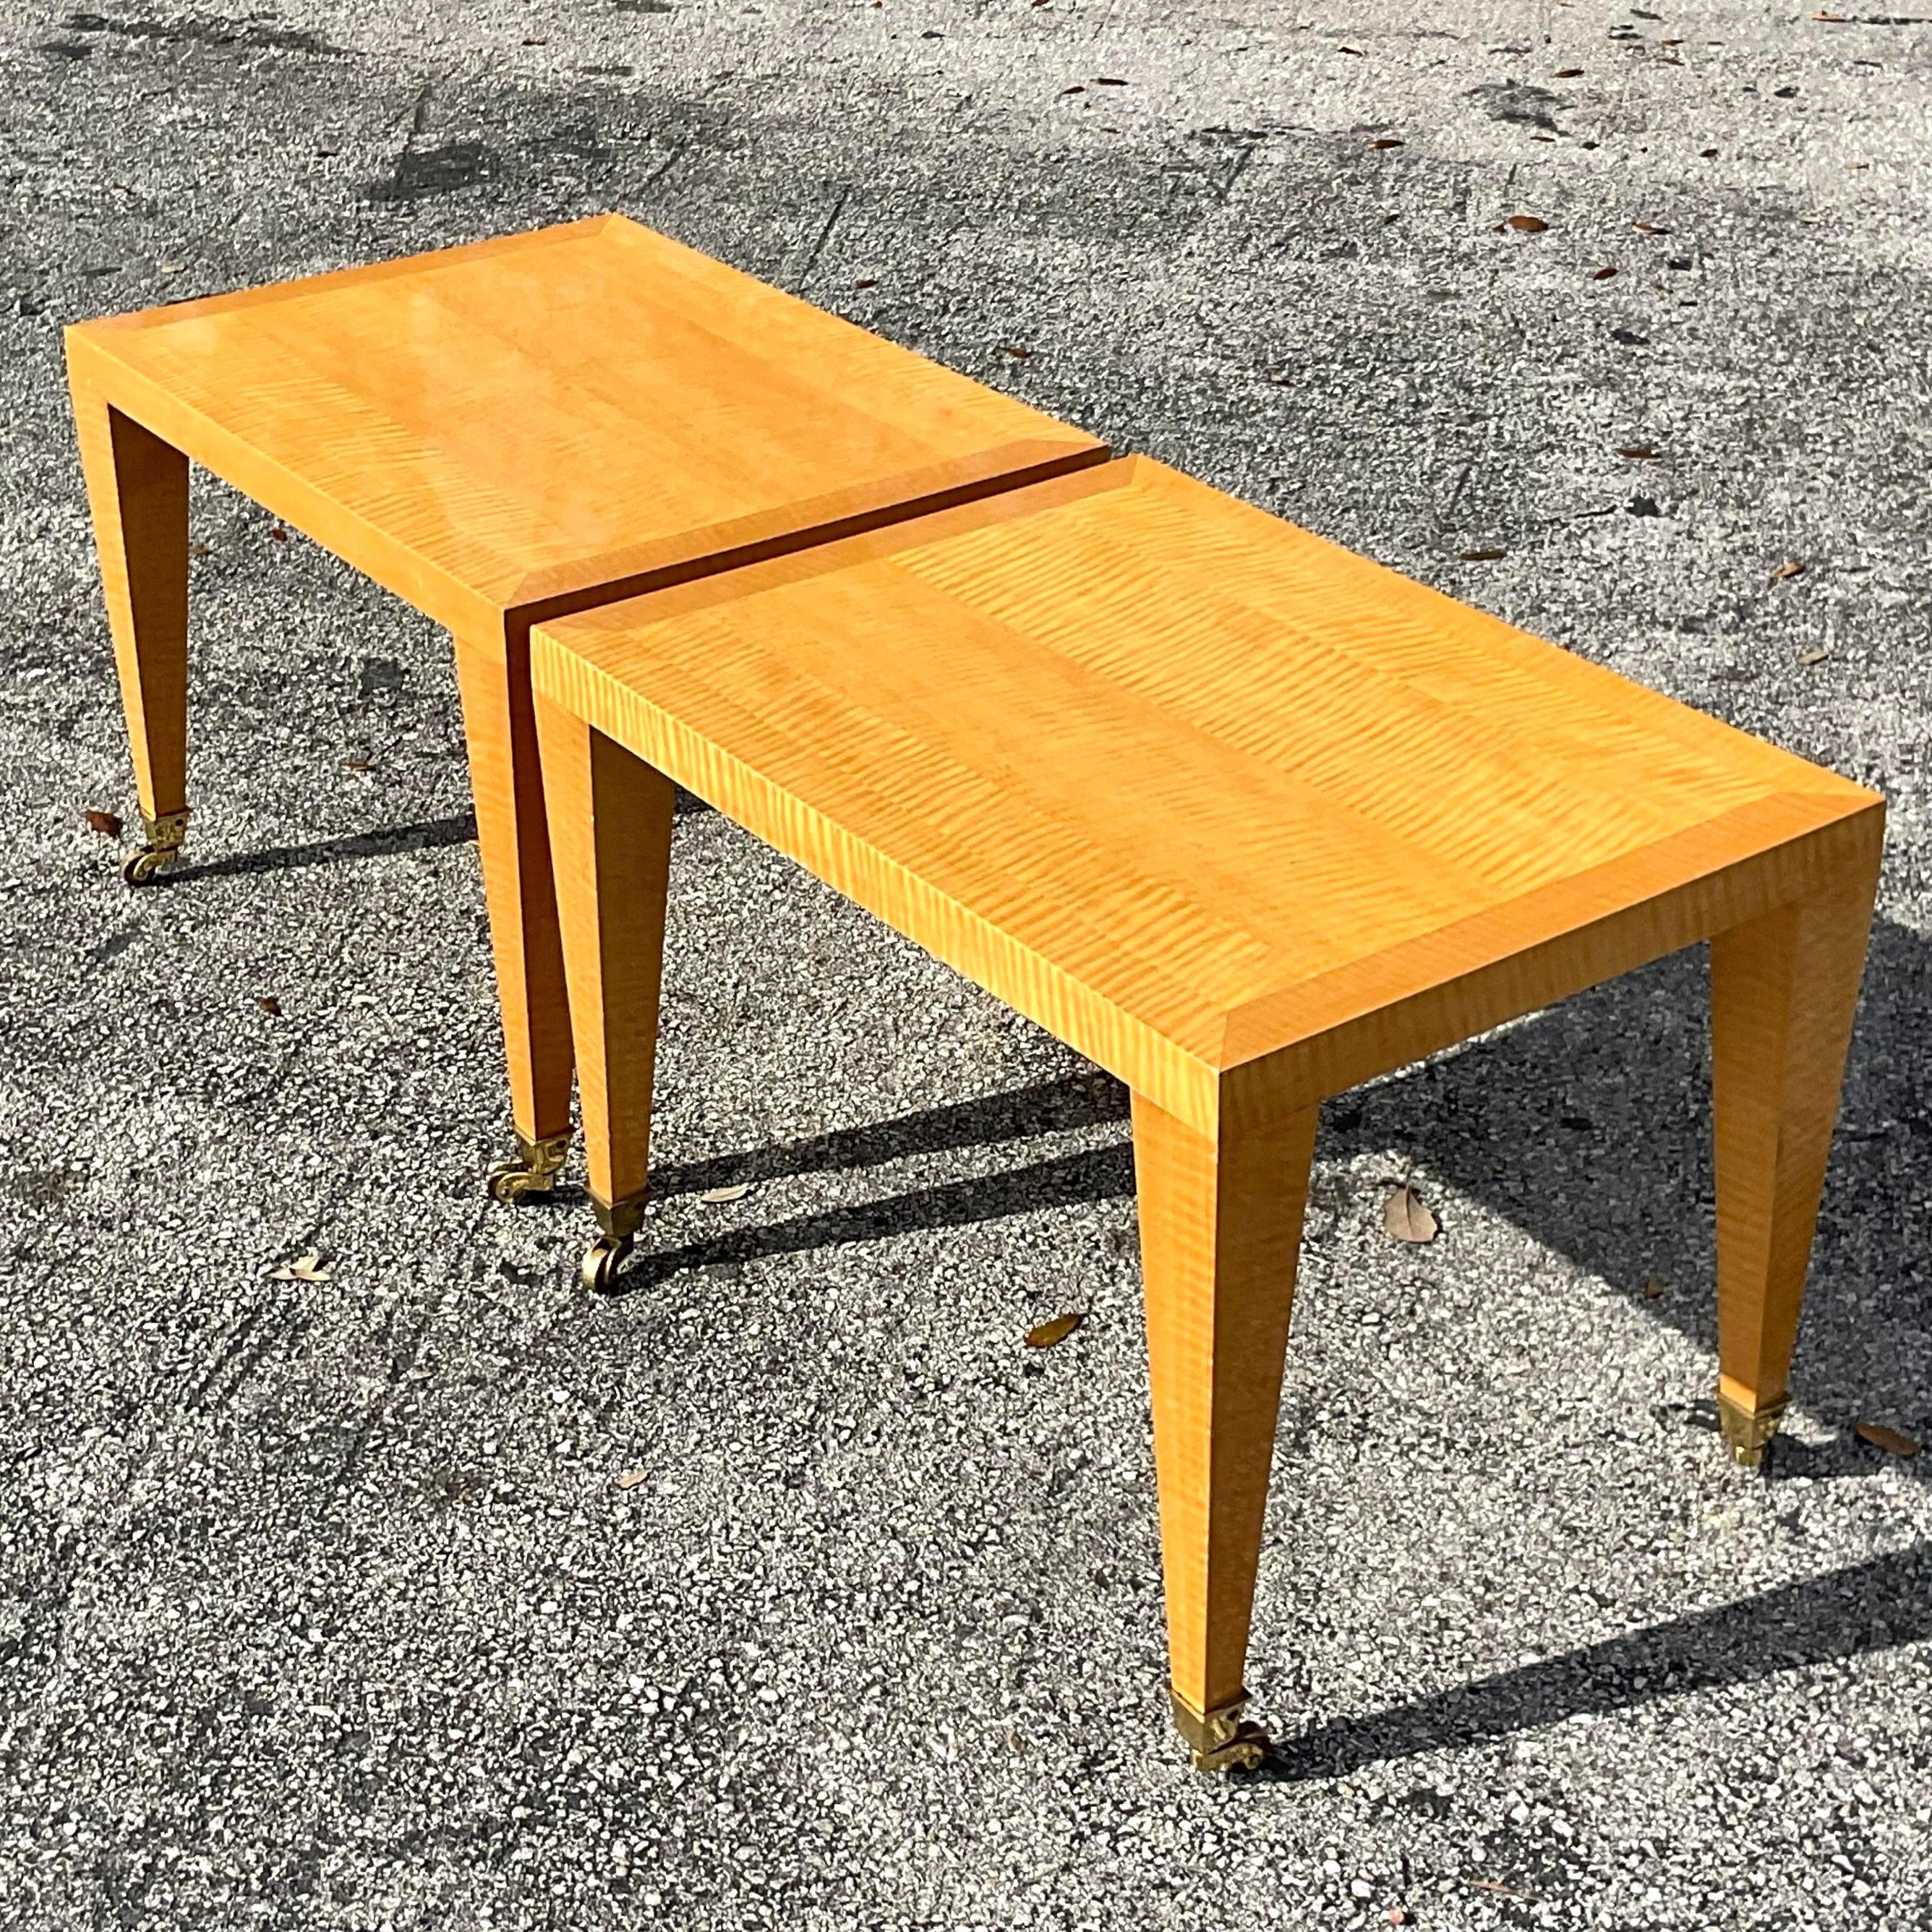 Late 20th Century Vintage Post Modern Burl Blonde Wood Side Tables - A Pair In Good Condition For Sale In west palm beach, FL